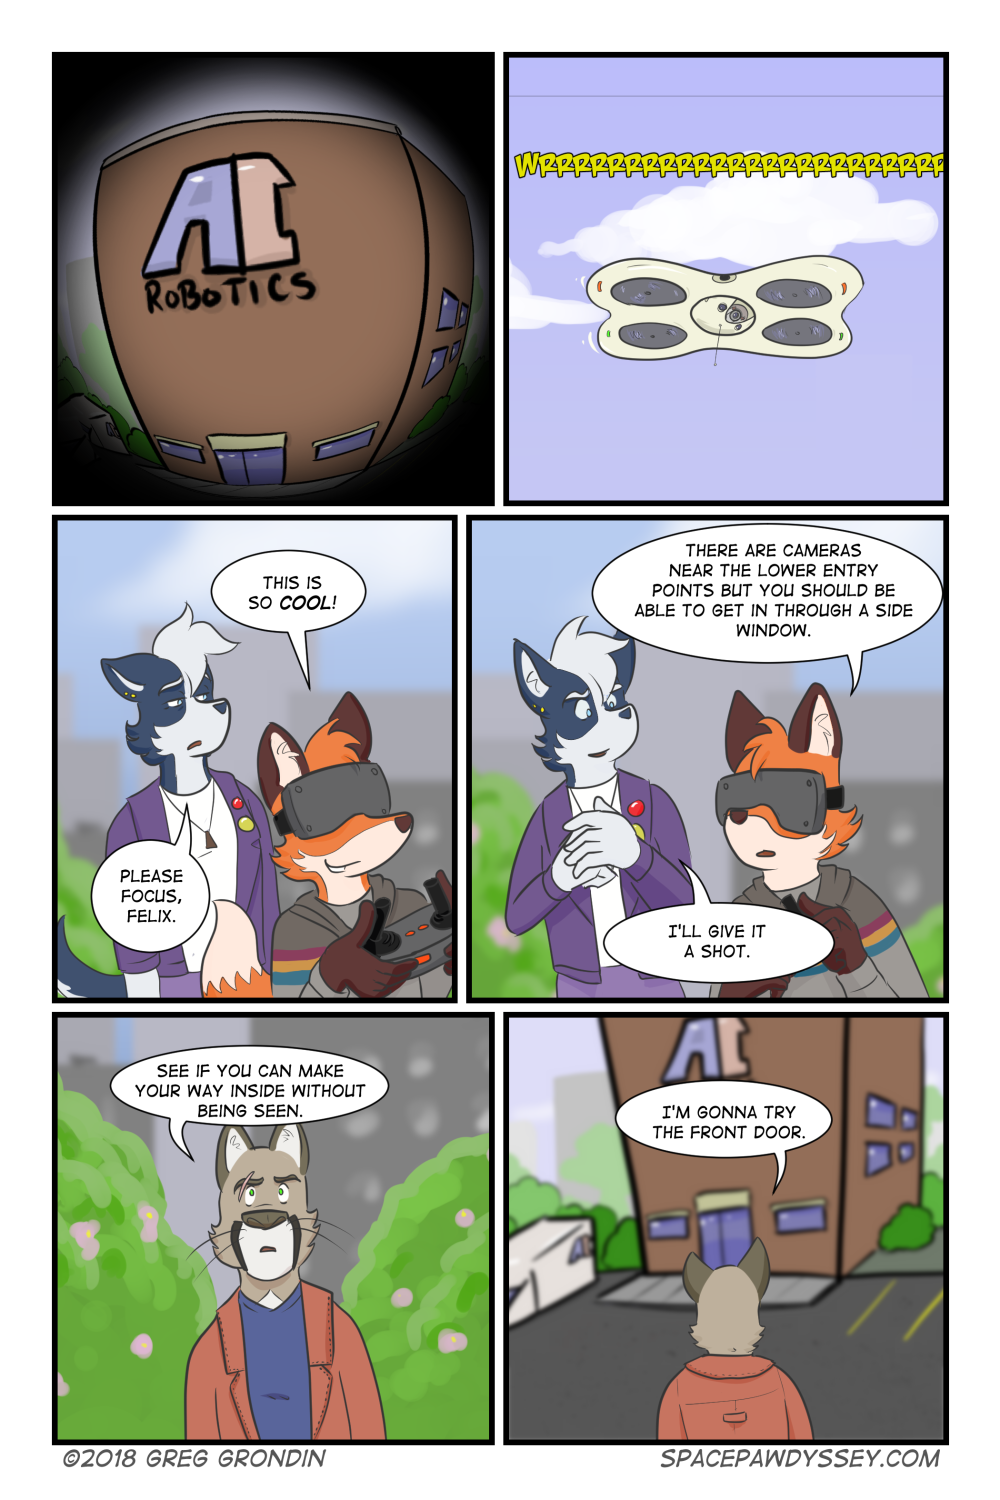 Space Pawdyssey #173